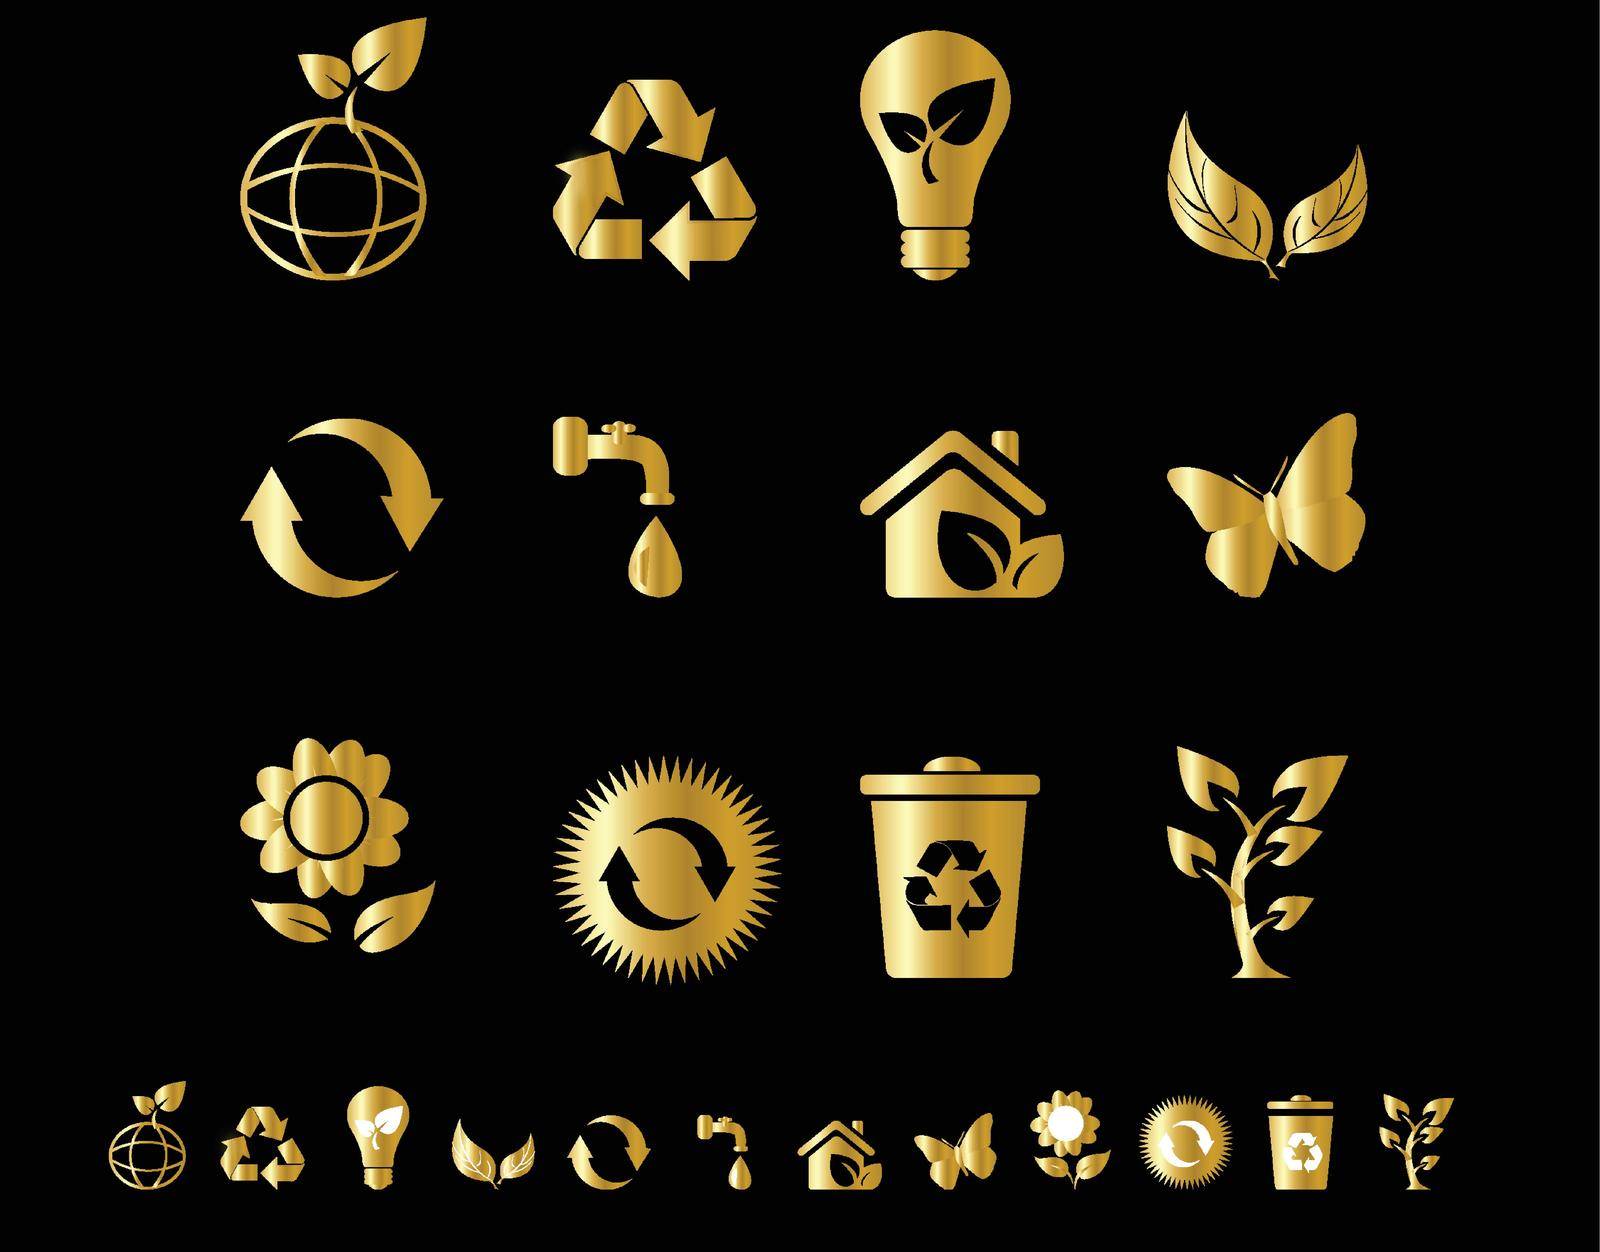 Gold eco icons isolate on black background by Vinhsino